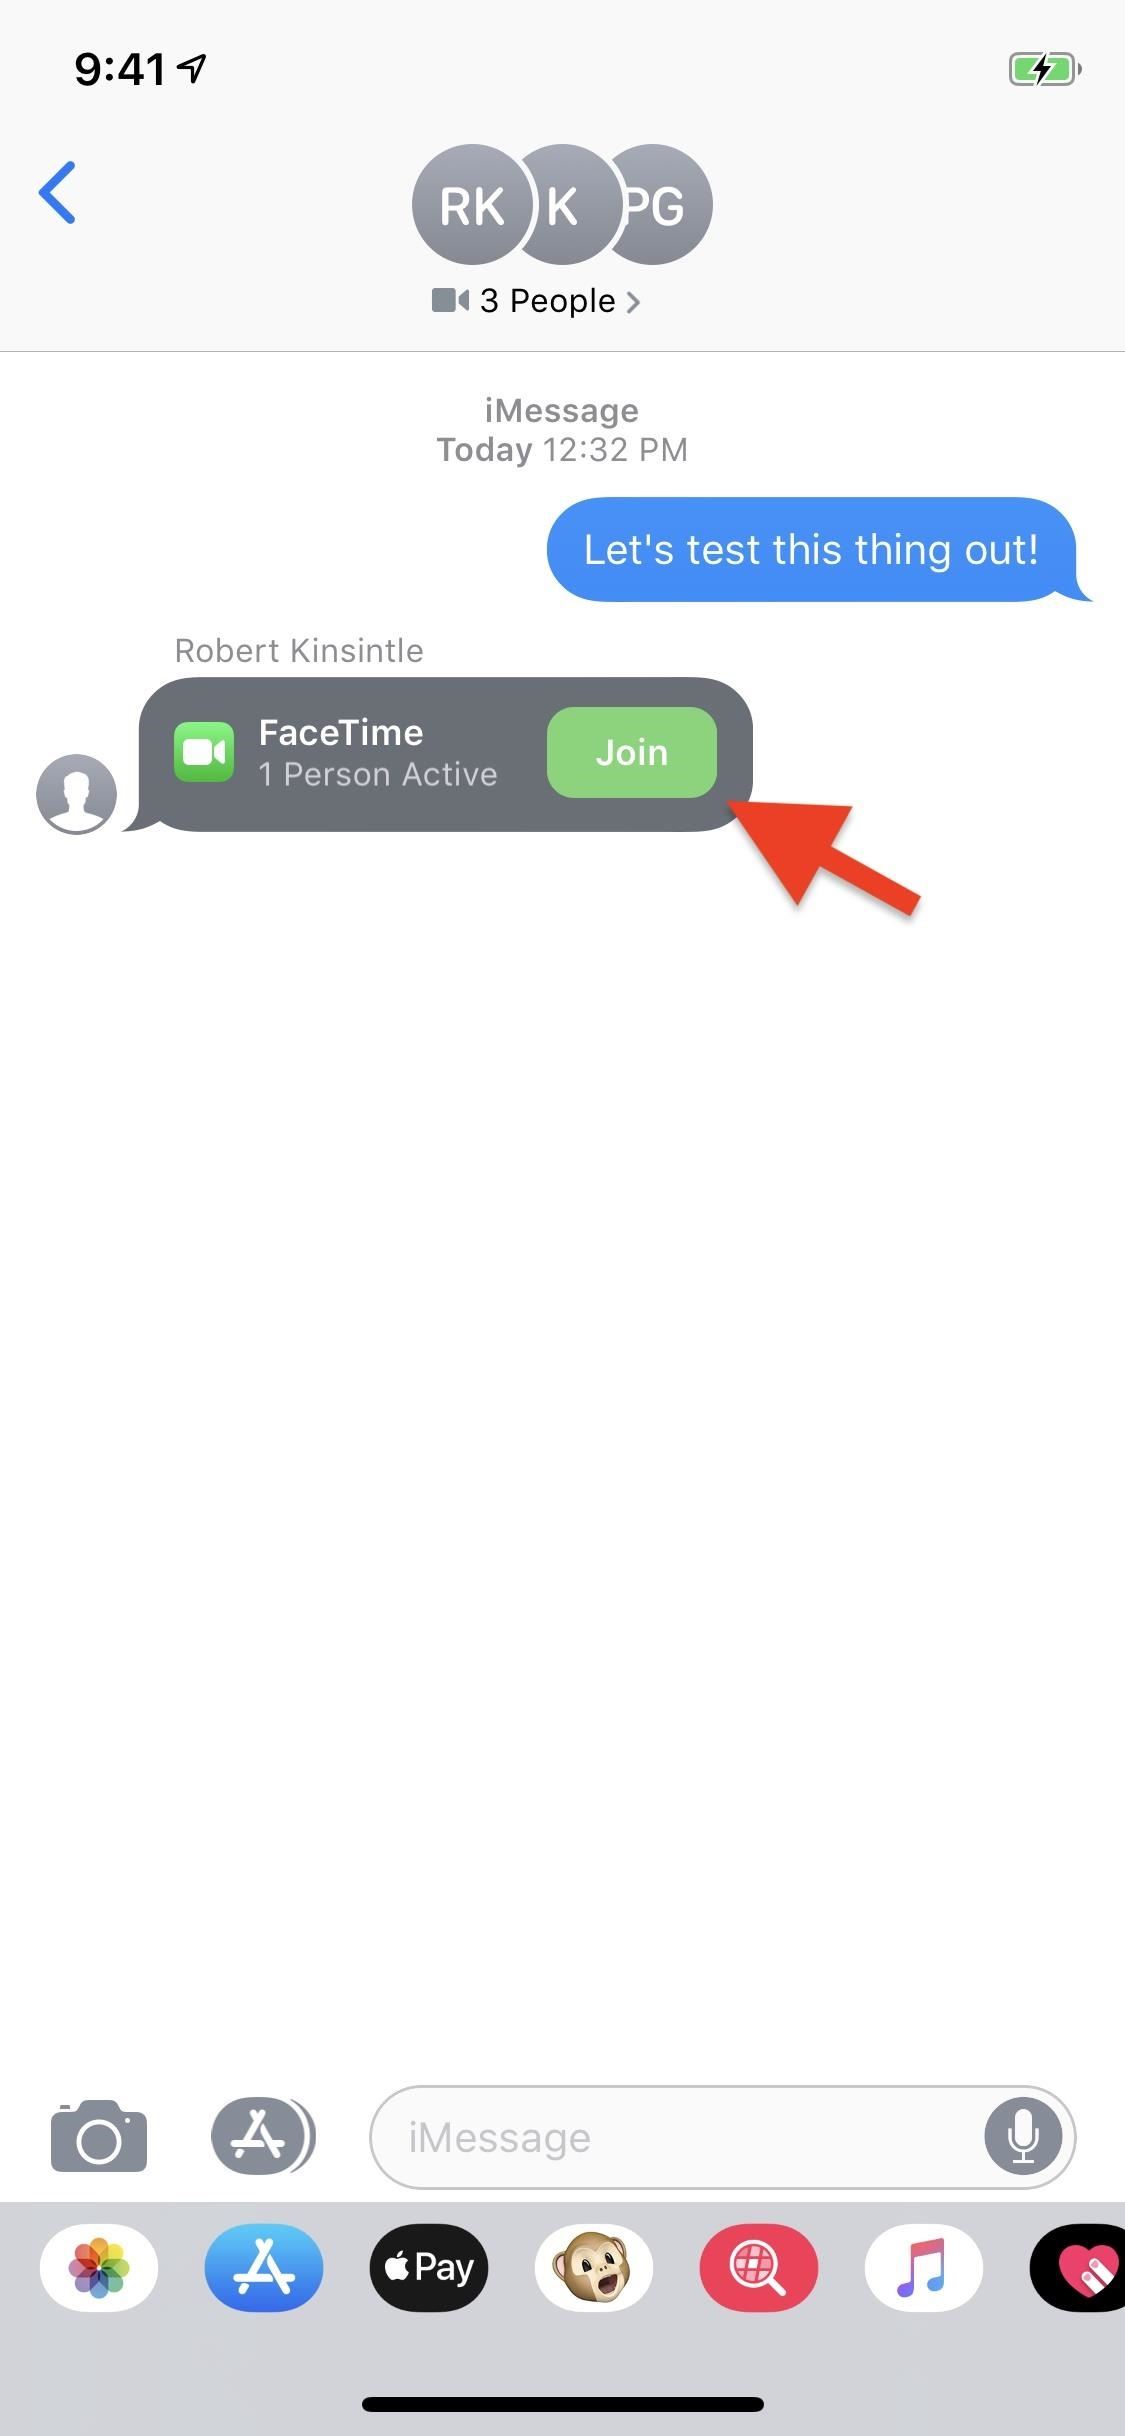 How to Use FaceTime's Group Chat on Your iPhone to Talk to More Than One Person at a Time